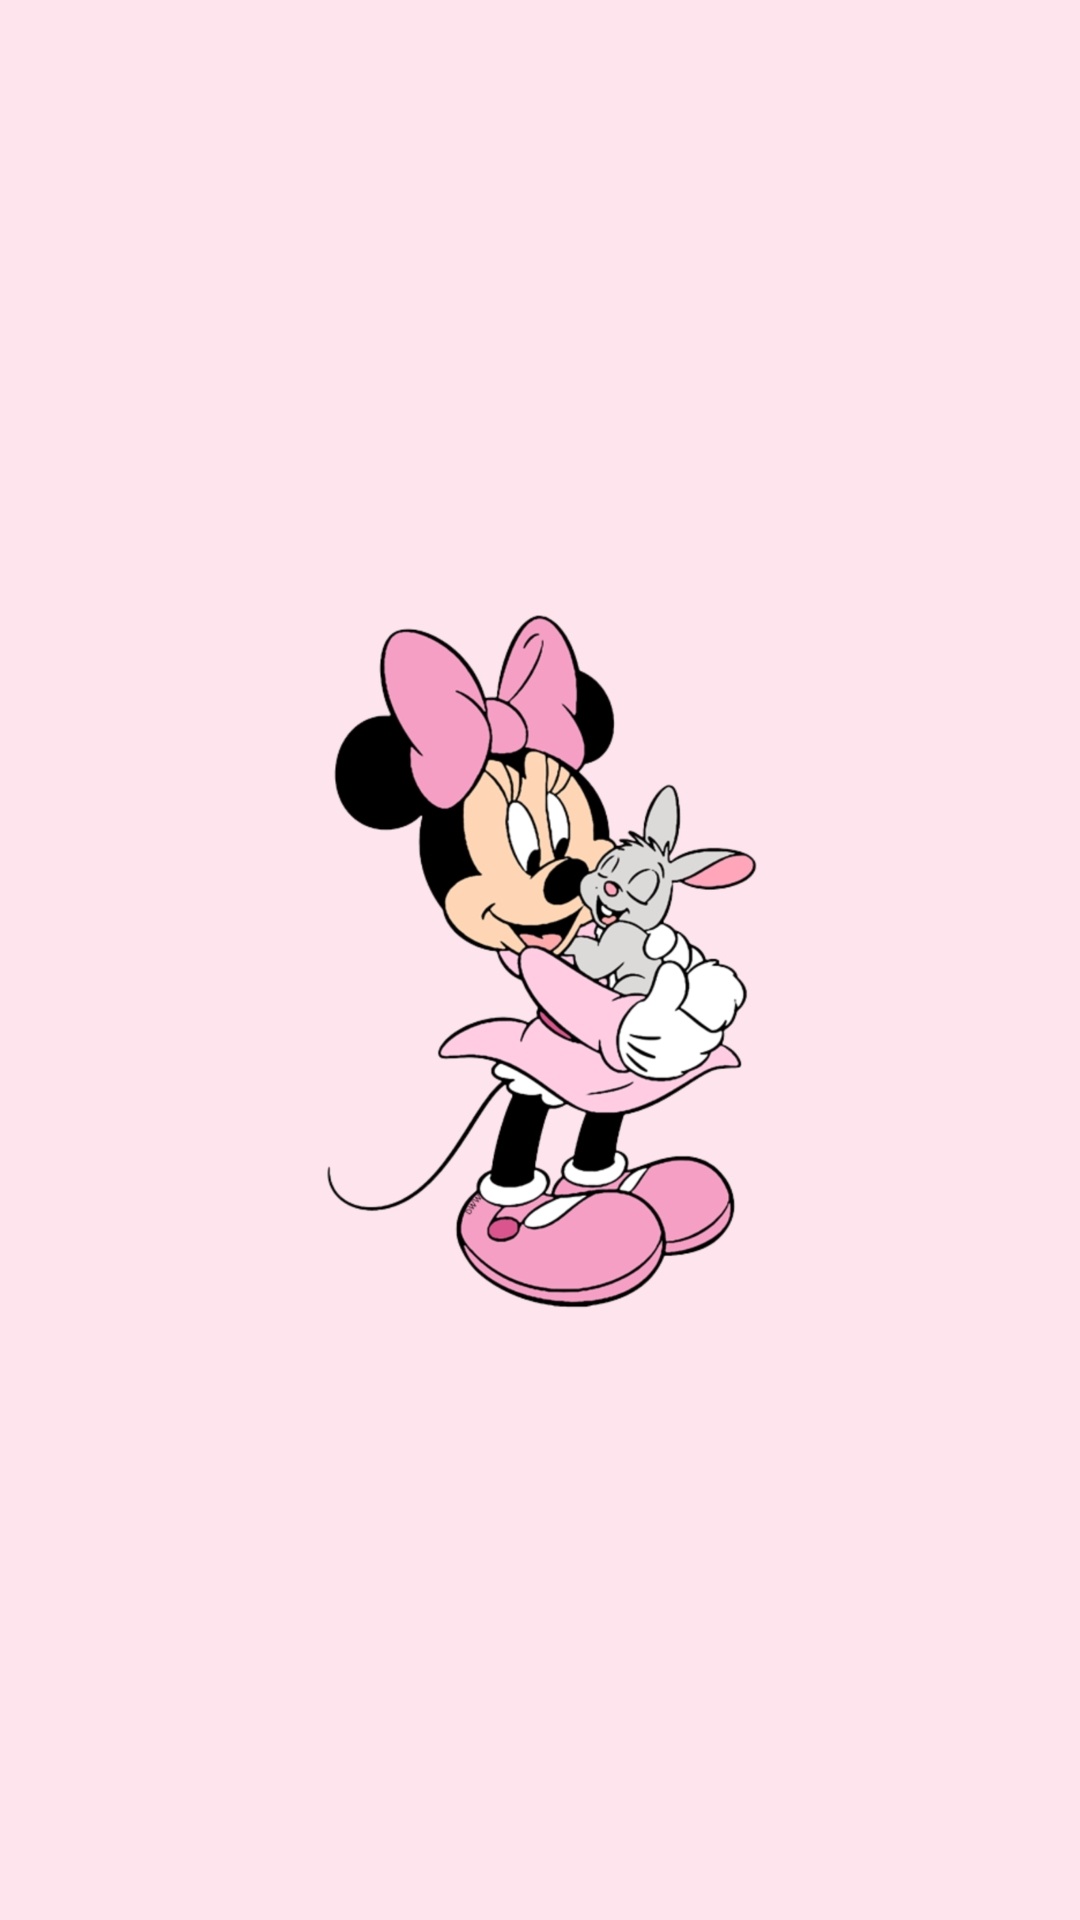 Mickey Mouse Tenant Une Illustration de Coeur Rose. Wallpaper in 1080x1920 Resolution